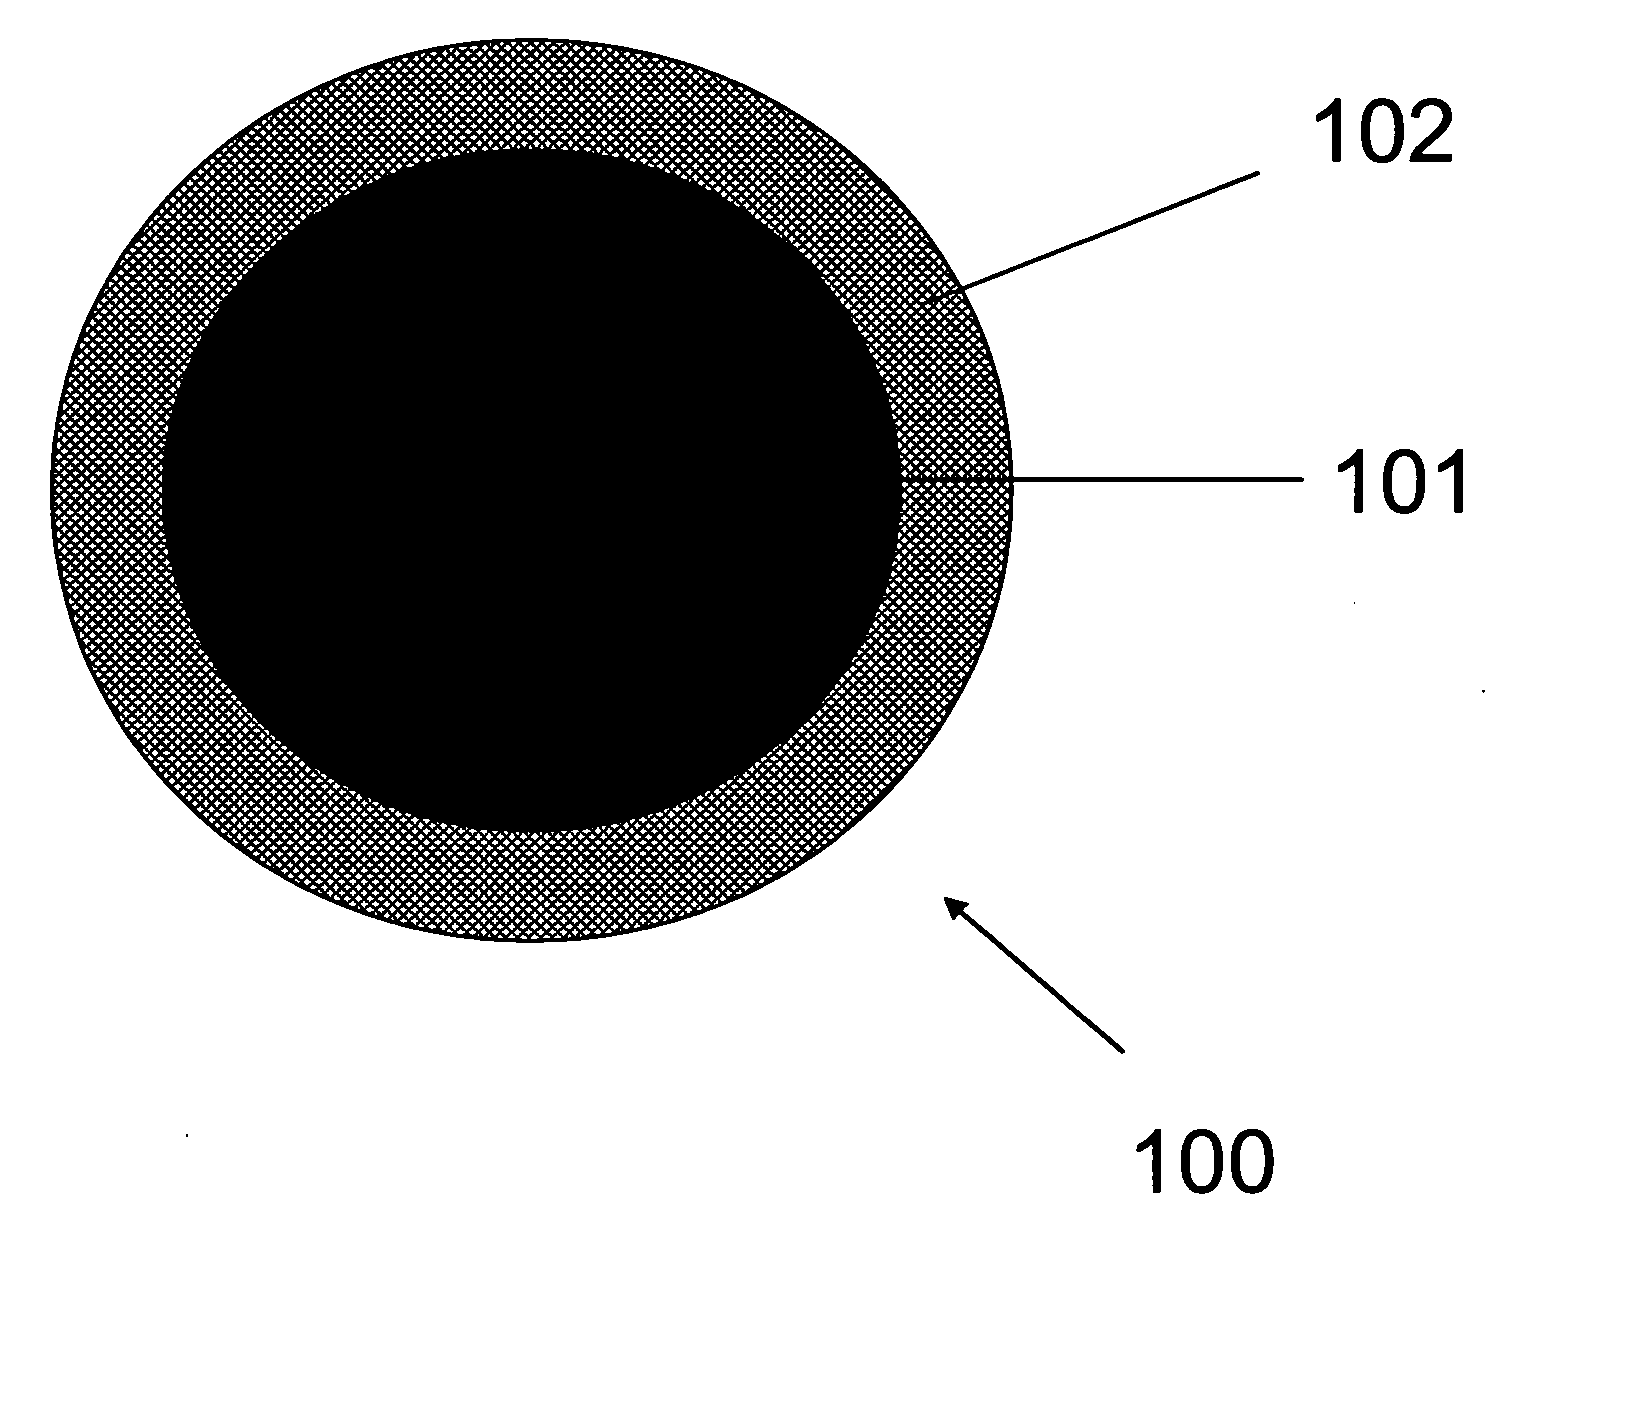 Nanoparticle-based imaging agents for X-ray/computed tomography